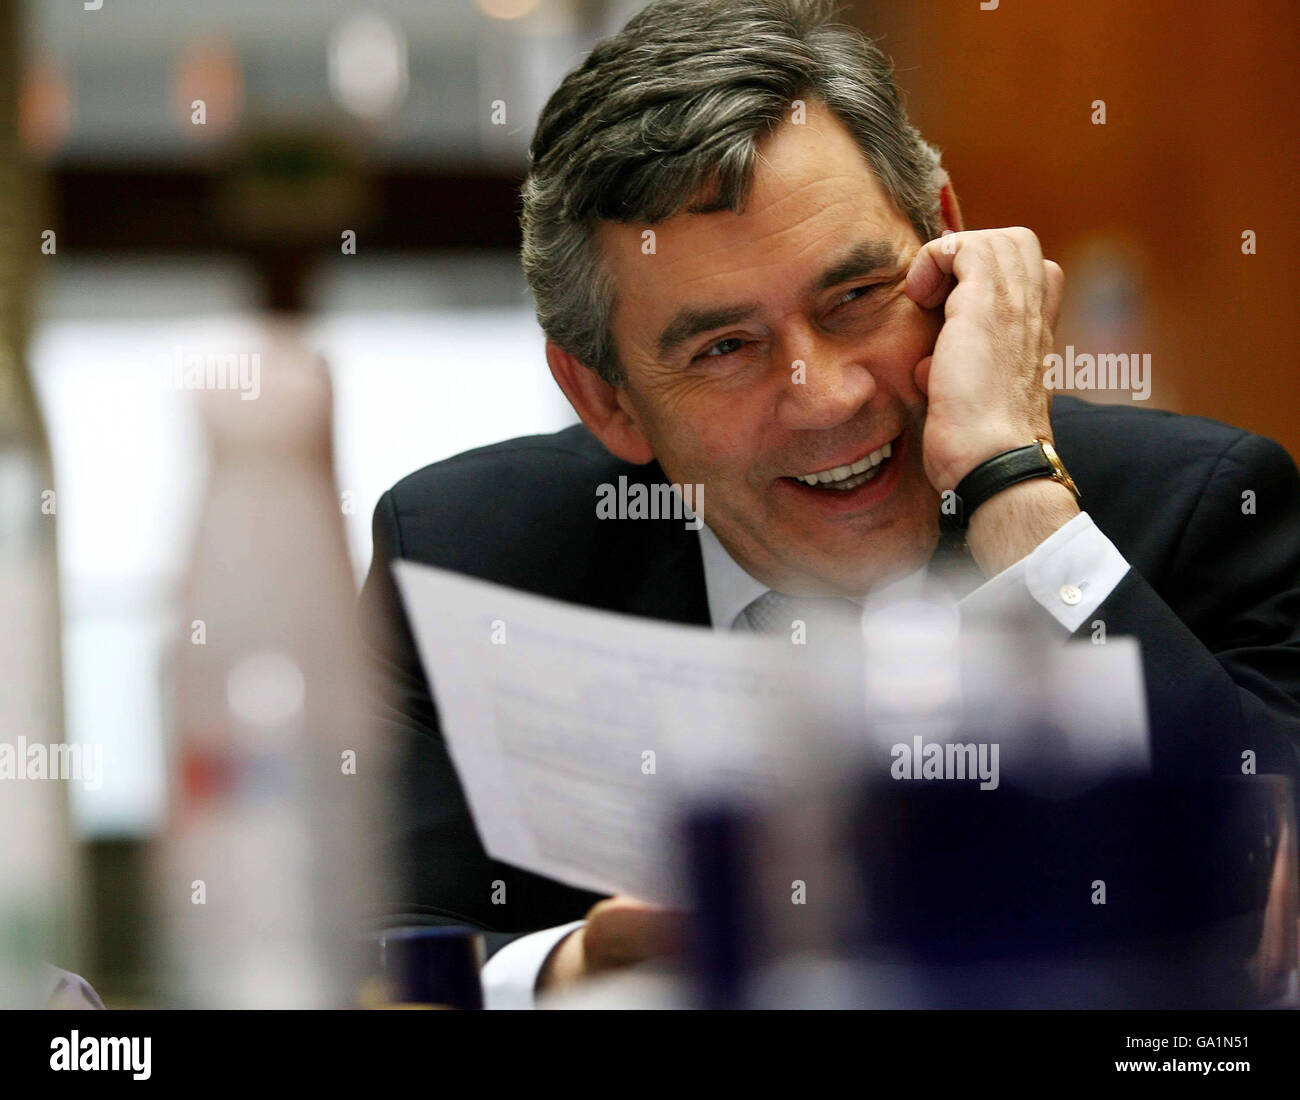 Prime Minister-in-waiting Gordon Brown speaks to members of the public during a Healthcare for London event at the TUC Congress Centre, London, where he said that the National Health Service is a 'precious asset' which needs to be built up in the coming years. Stock Photo